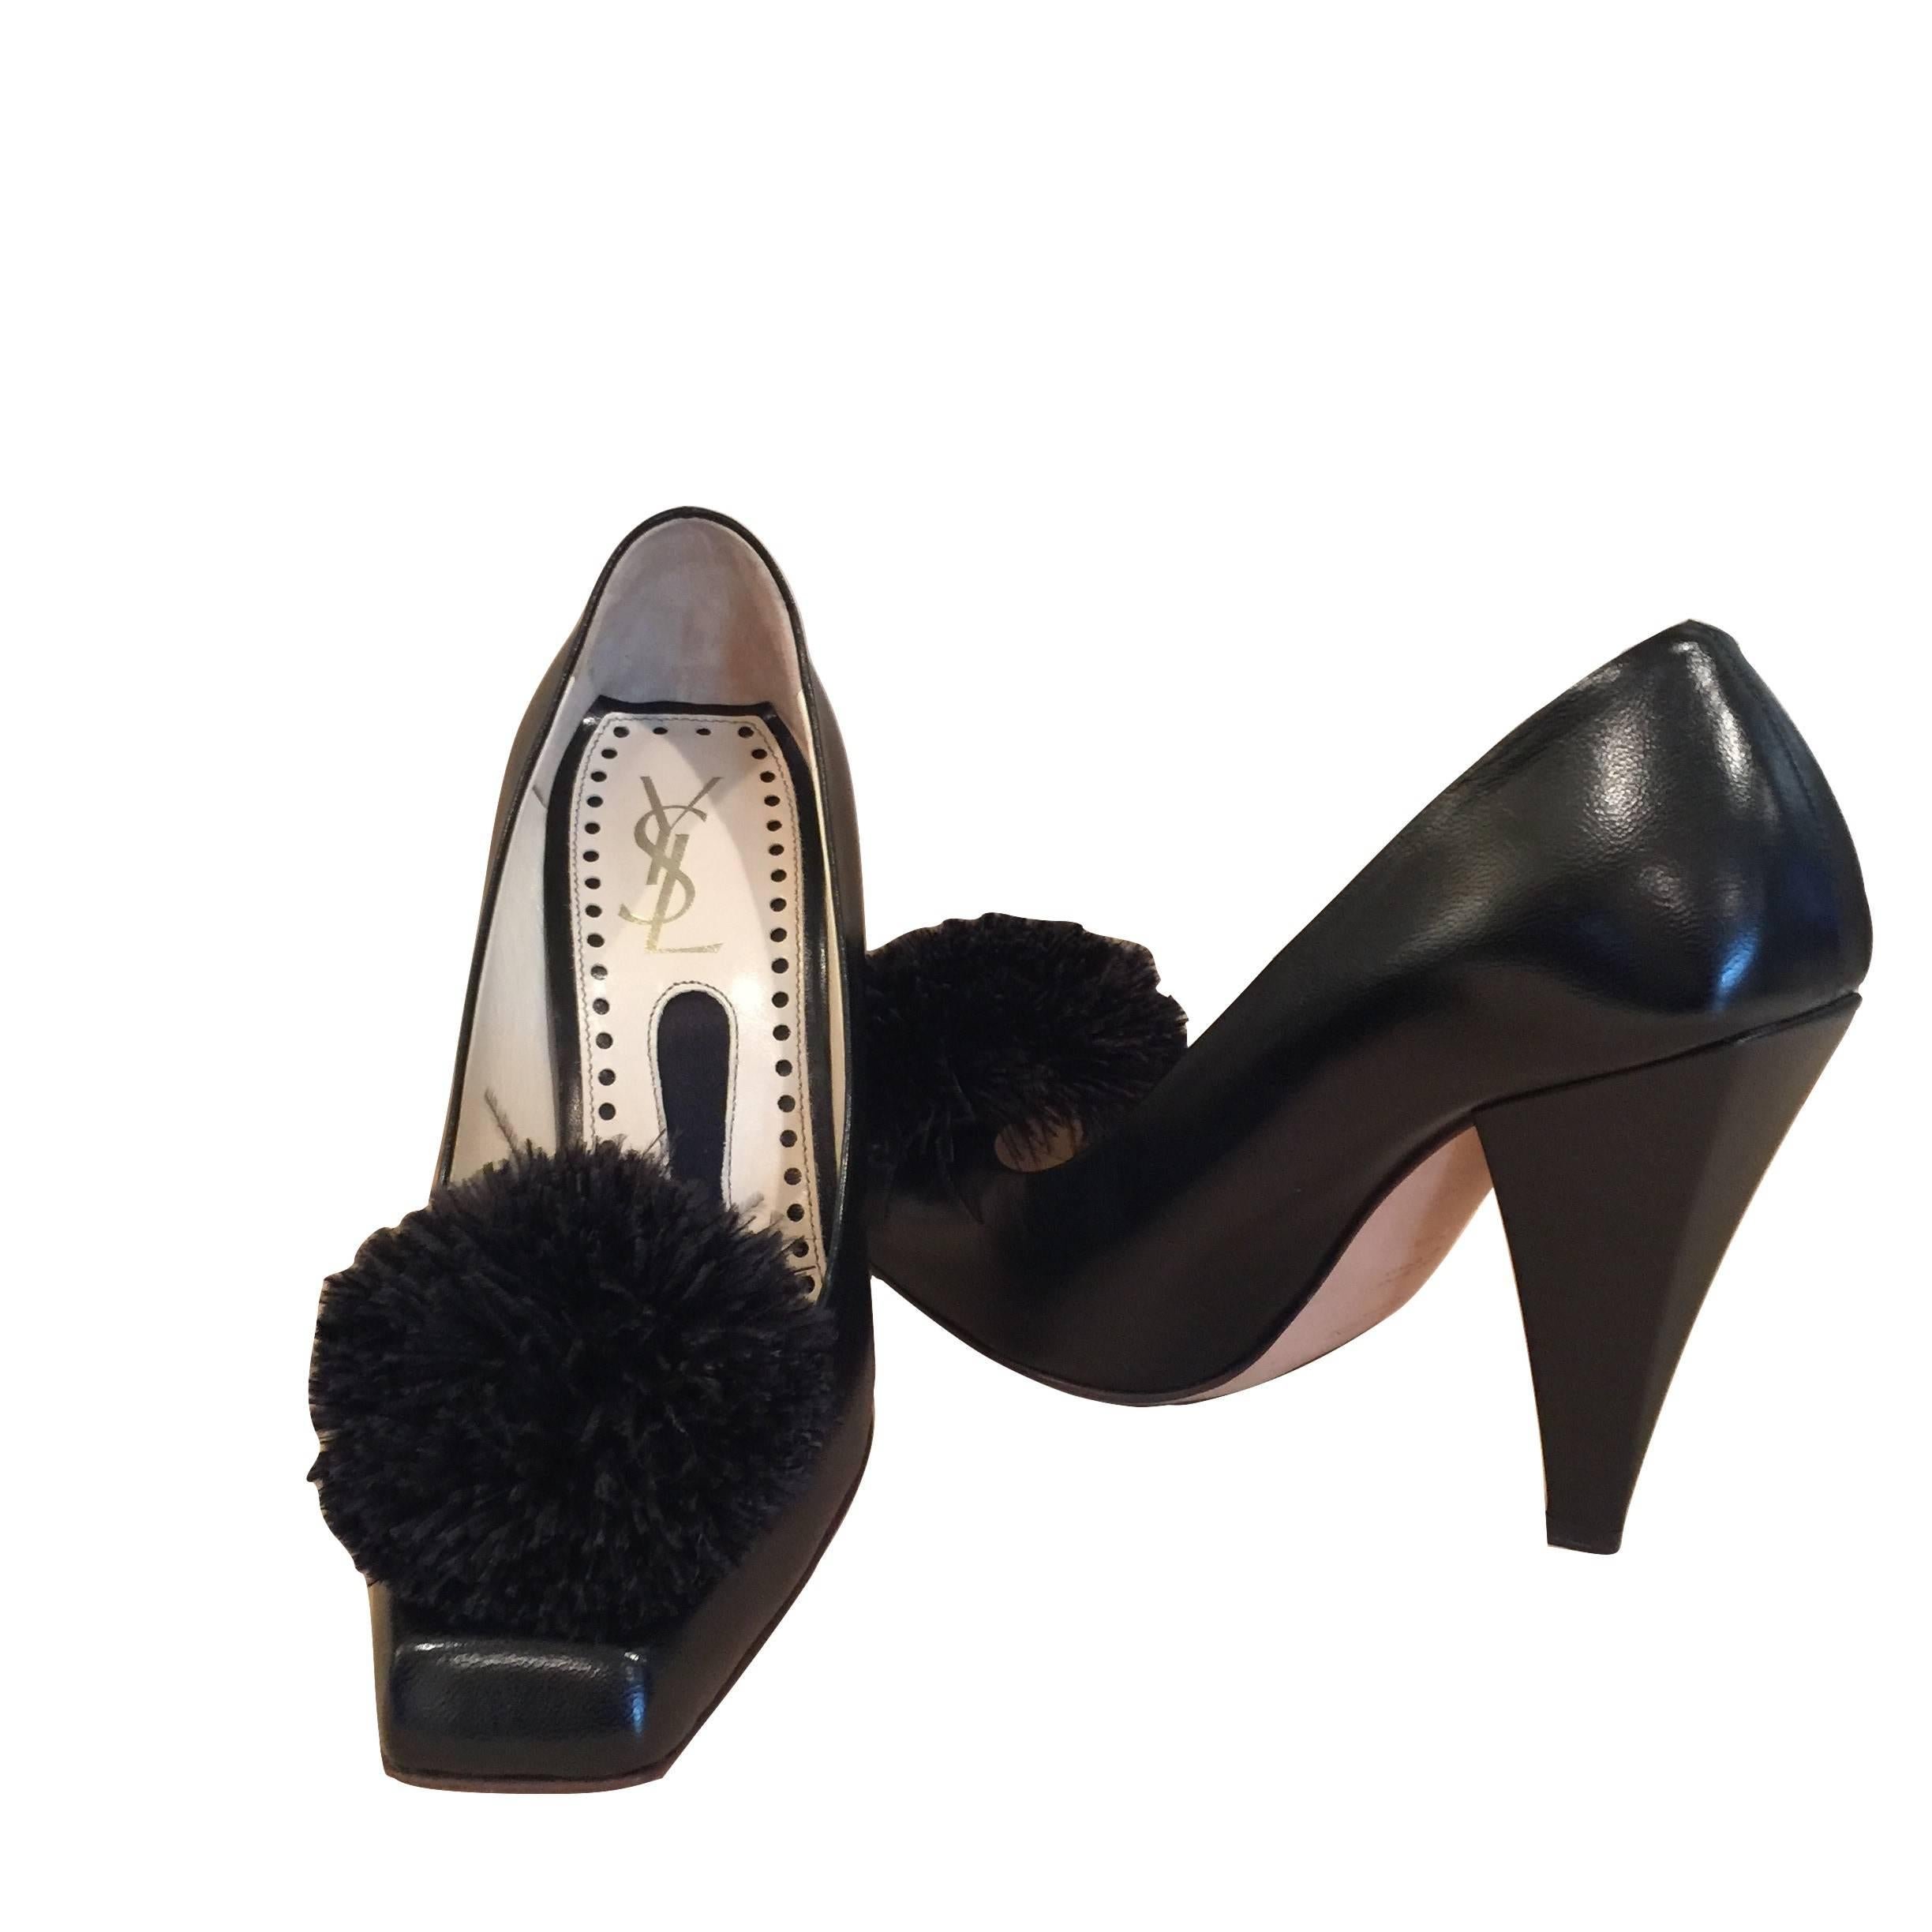 New Yves Saint Laurent YSL Black Heels Pumps Sz 38.5 Featured in Rare Banned Ad 7